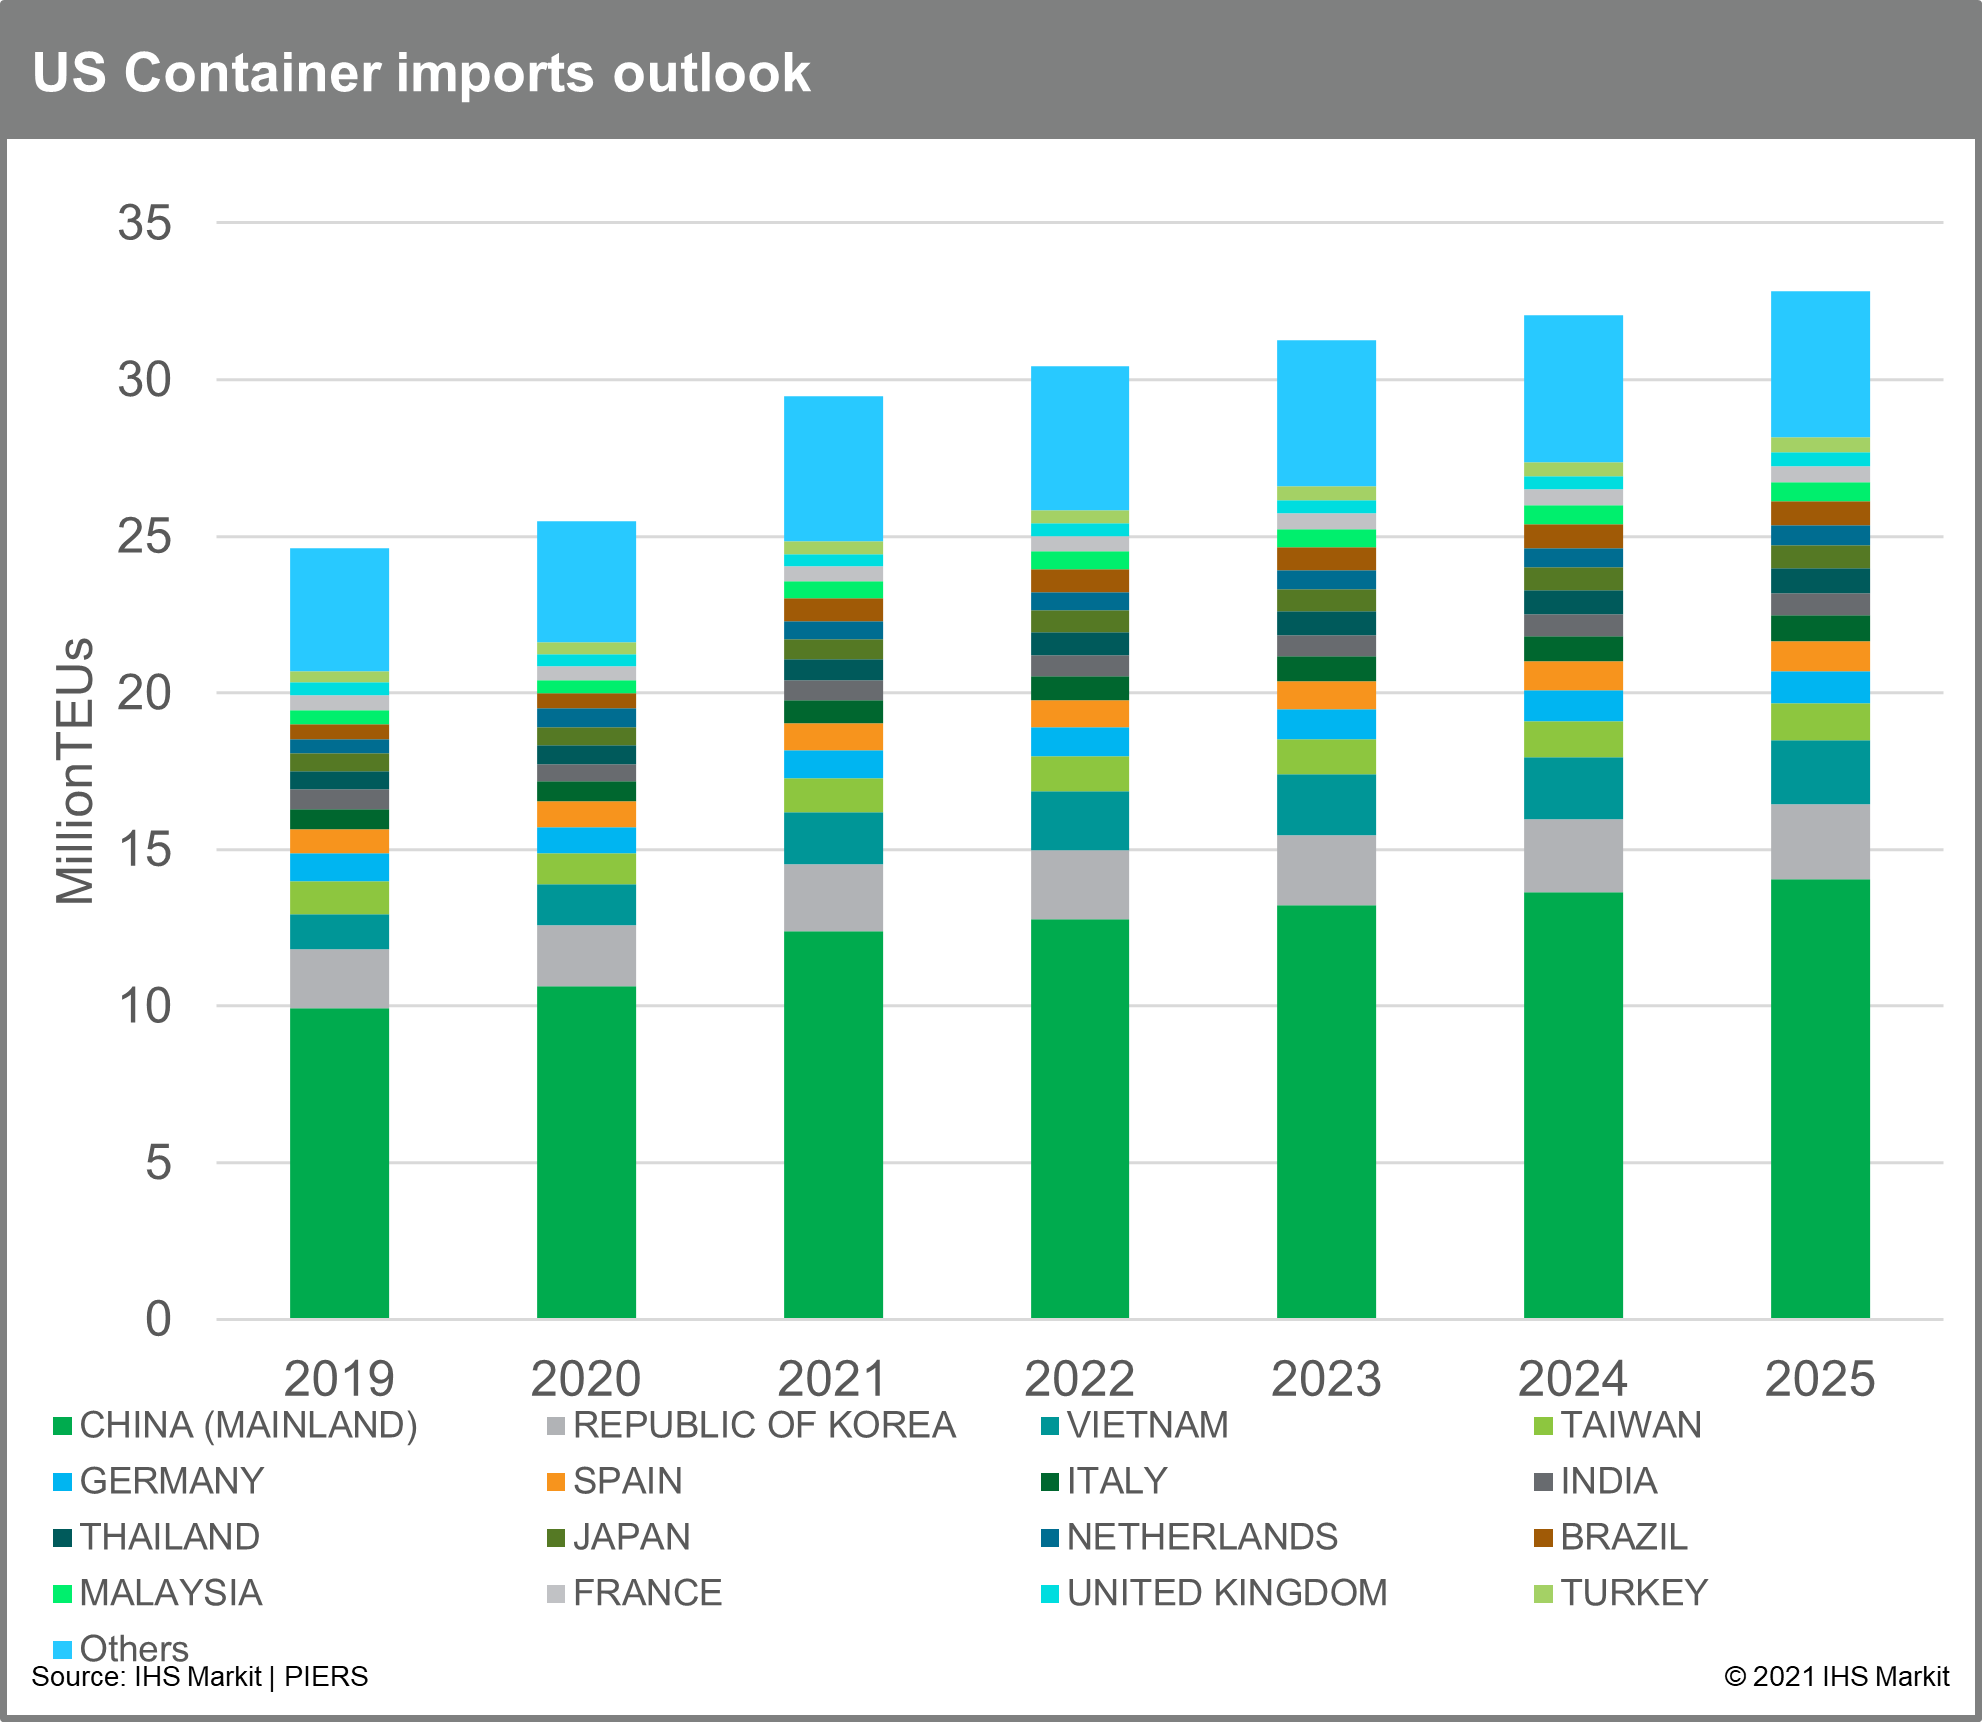 Shipping market outlook 2022 Container vs Dry bulk S&P Global